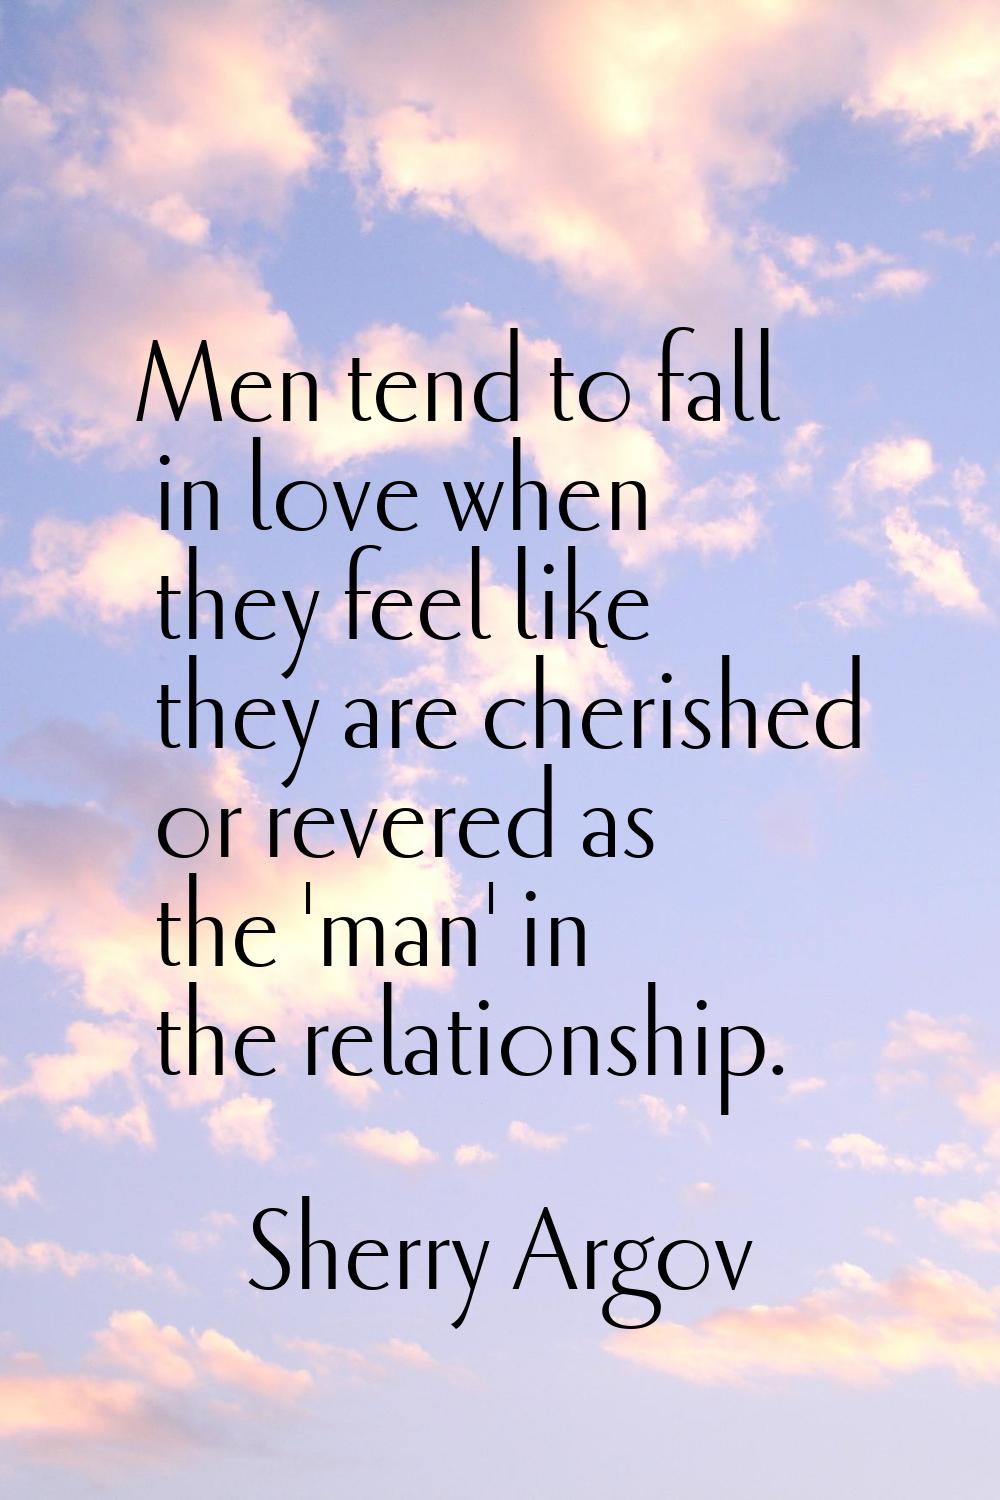 Men tend to fall in love when they feel like they are cherished or revered as the 'man' in the rela